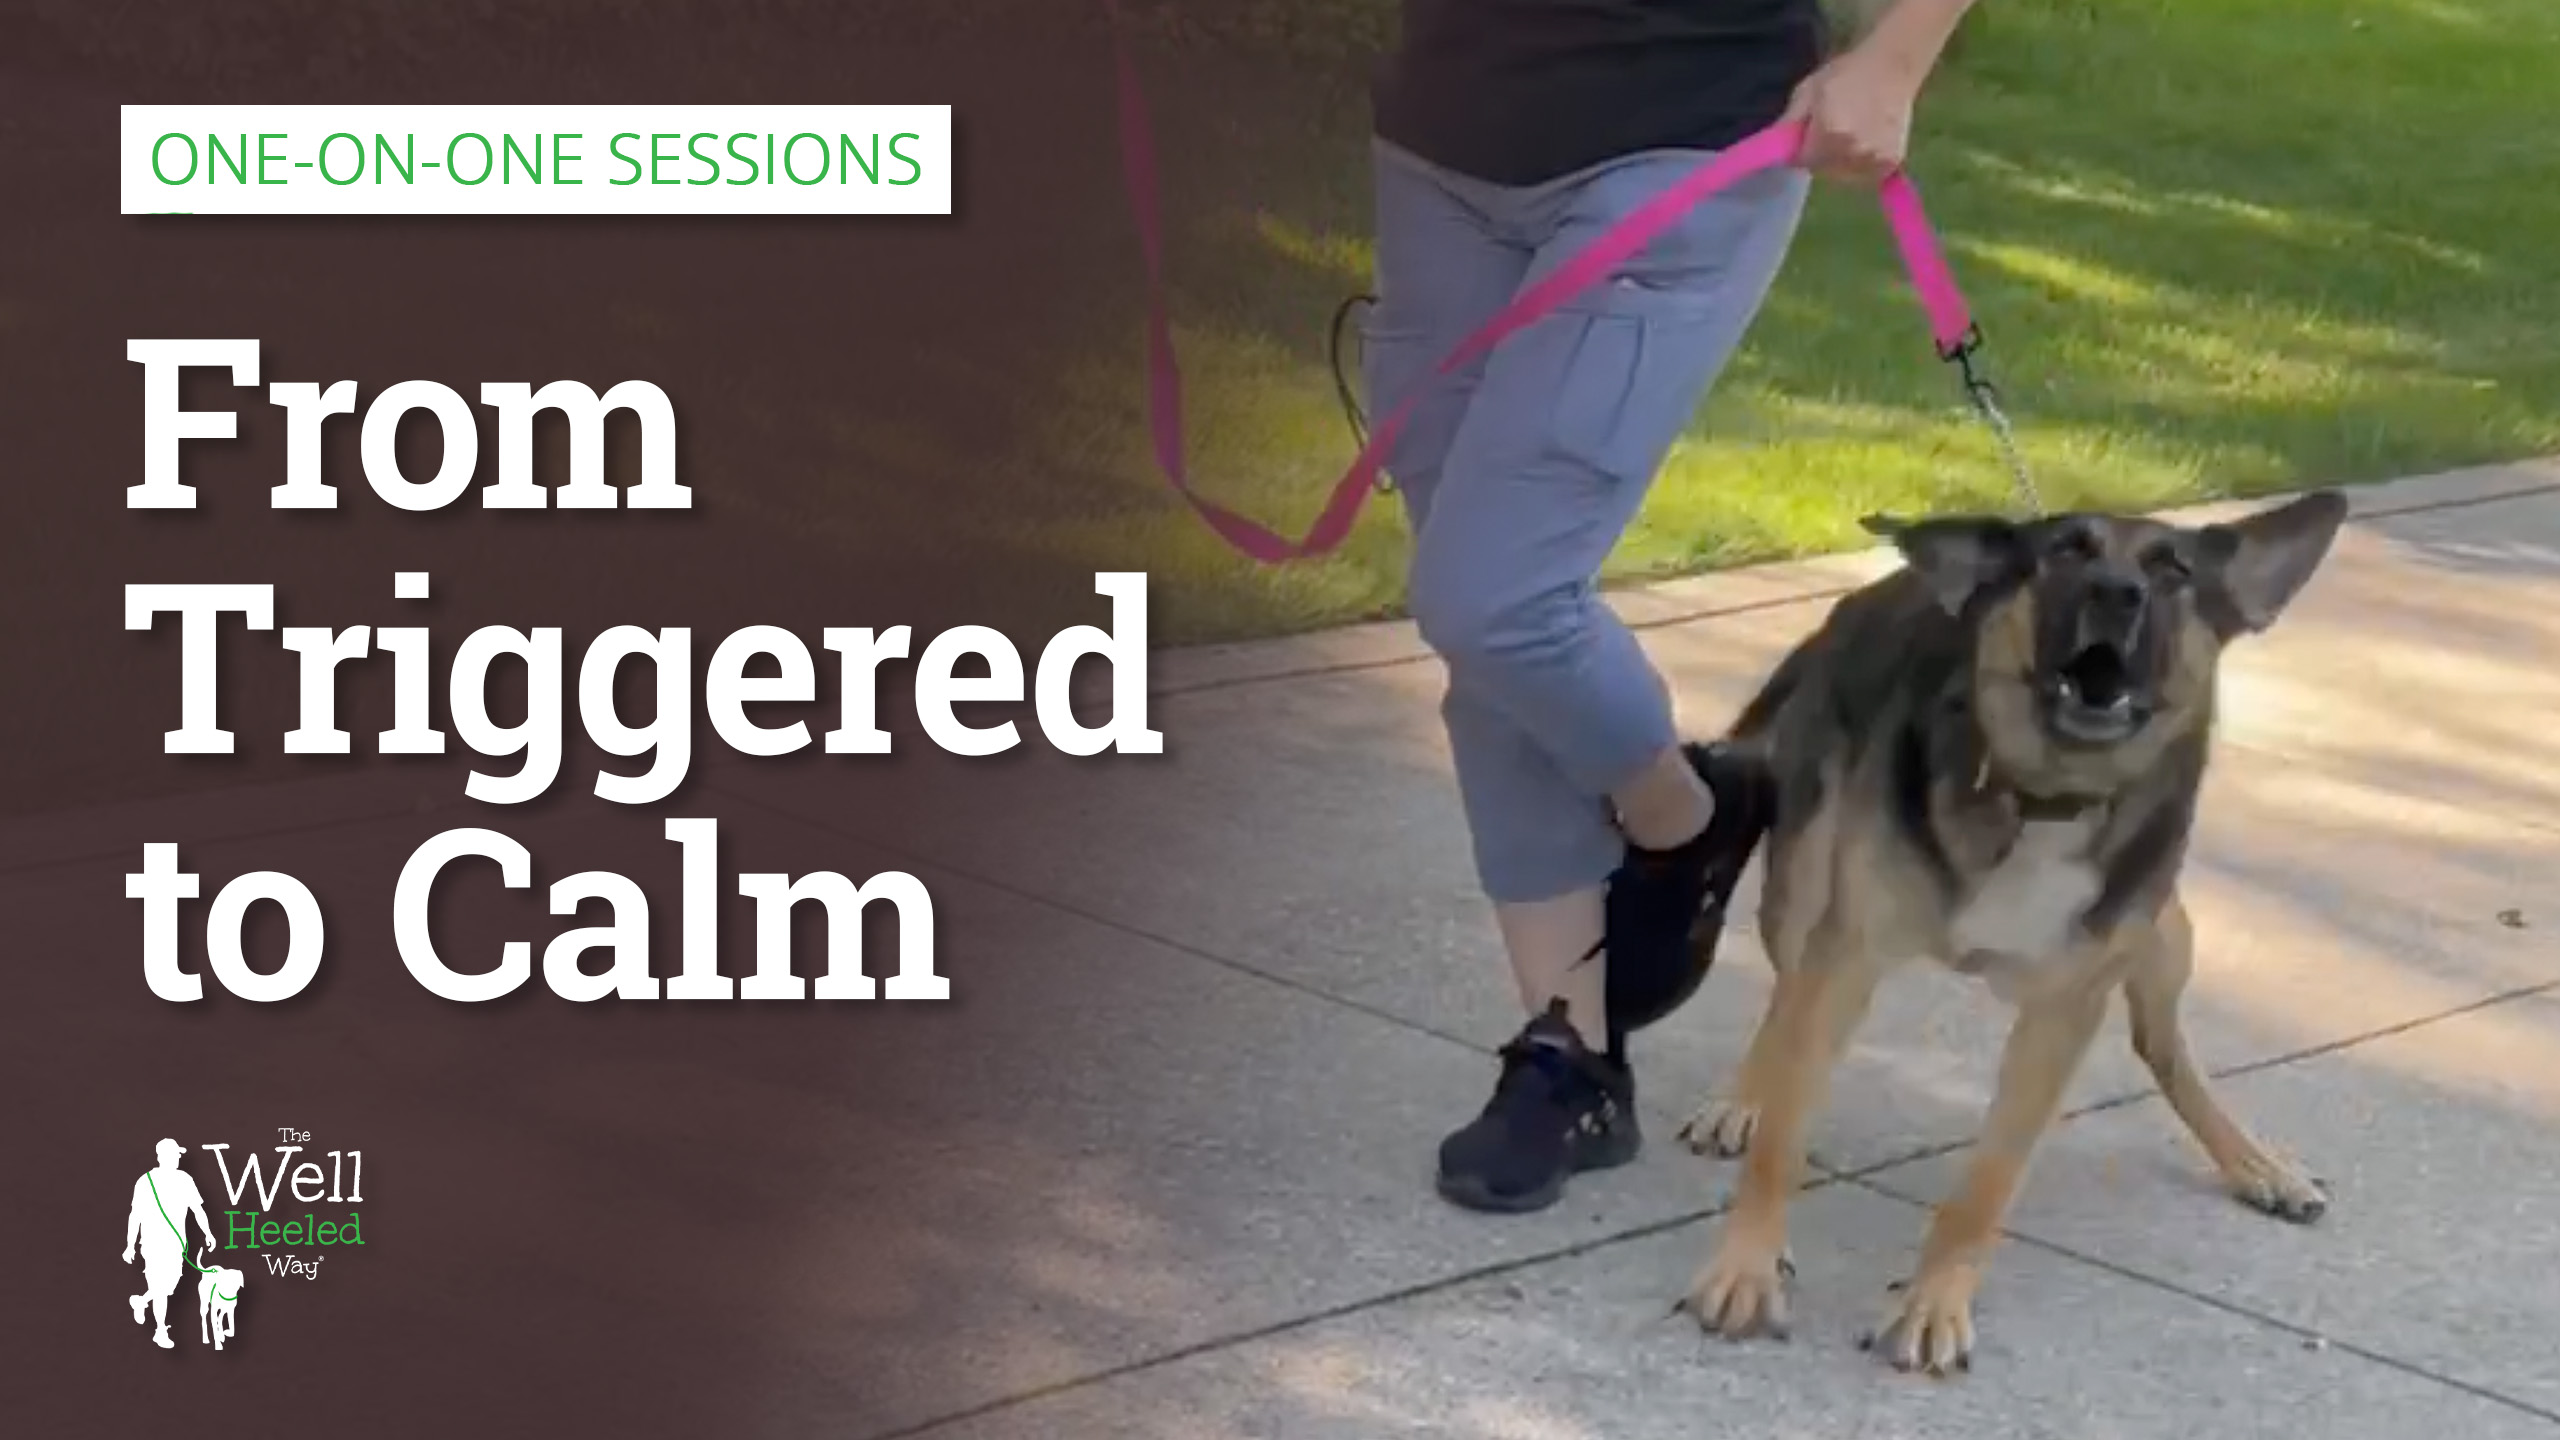 One-on-One Sessions — From Triggered to Calm